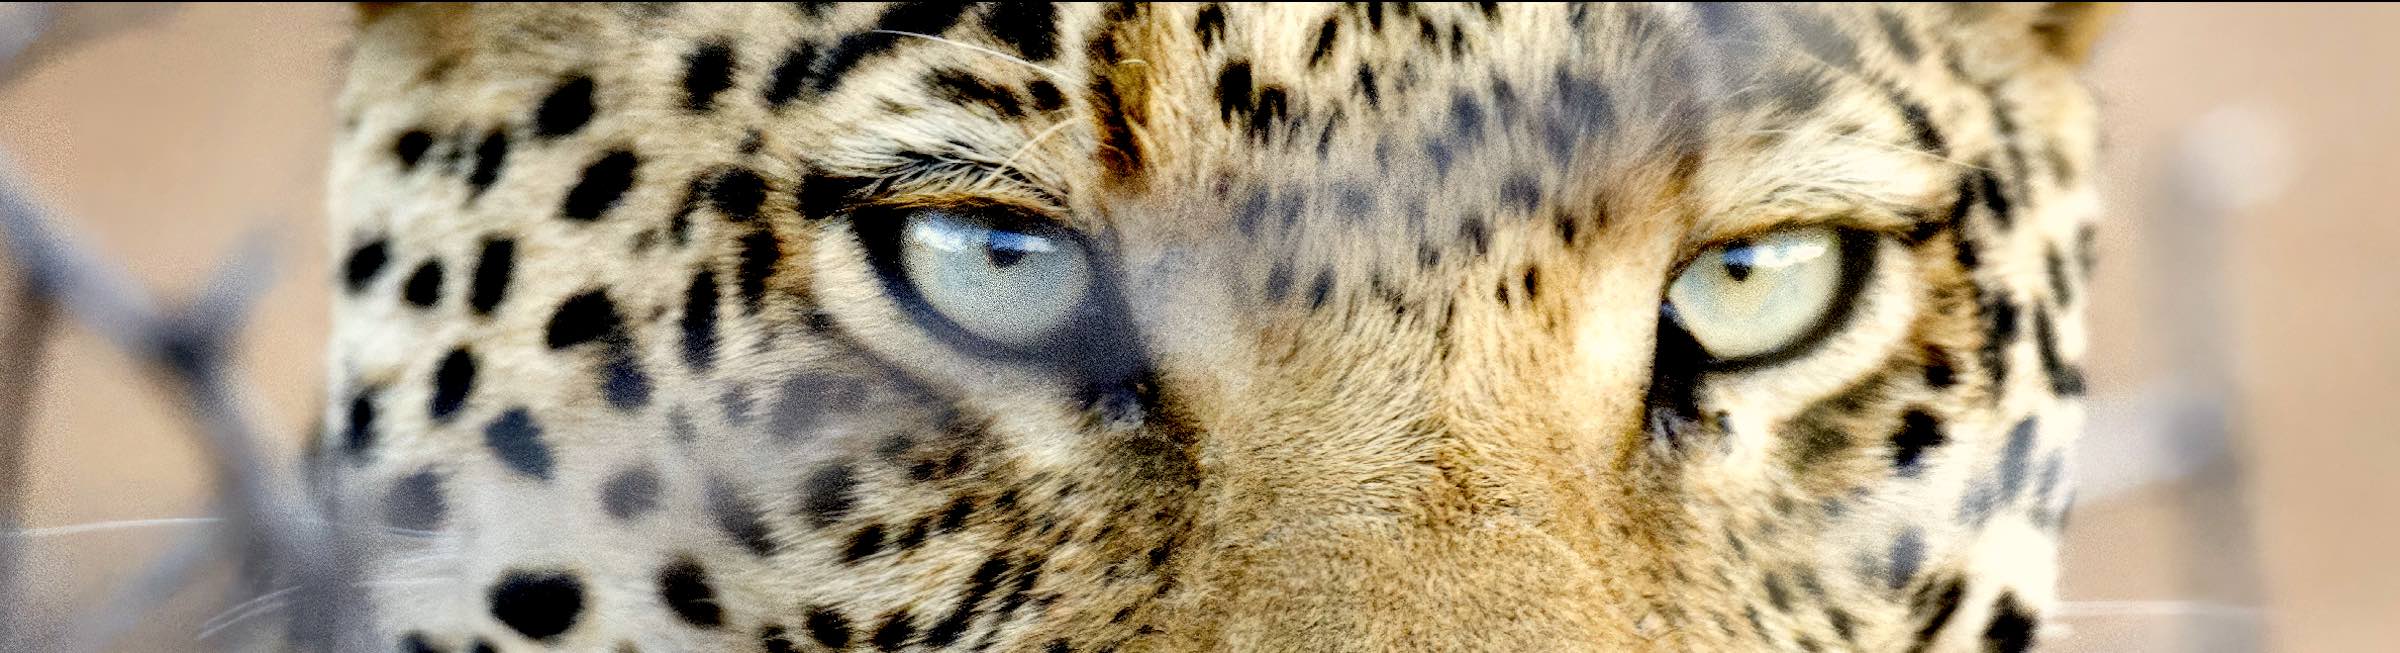 Close-up image of a leopards eyes.